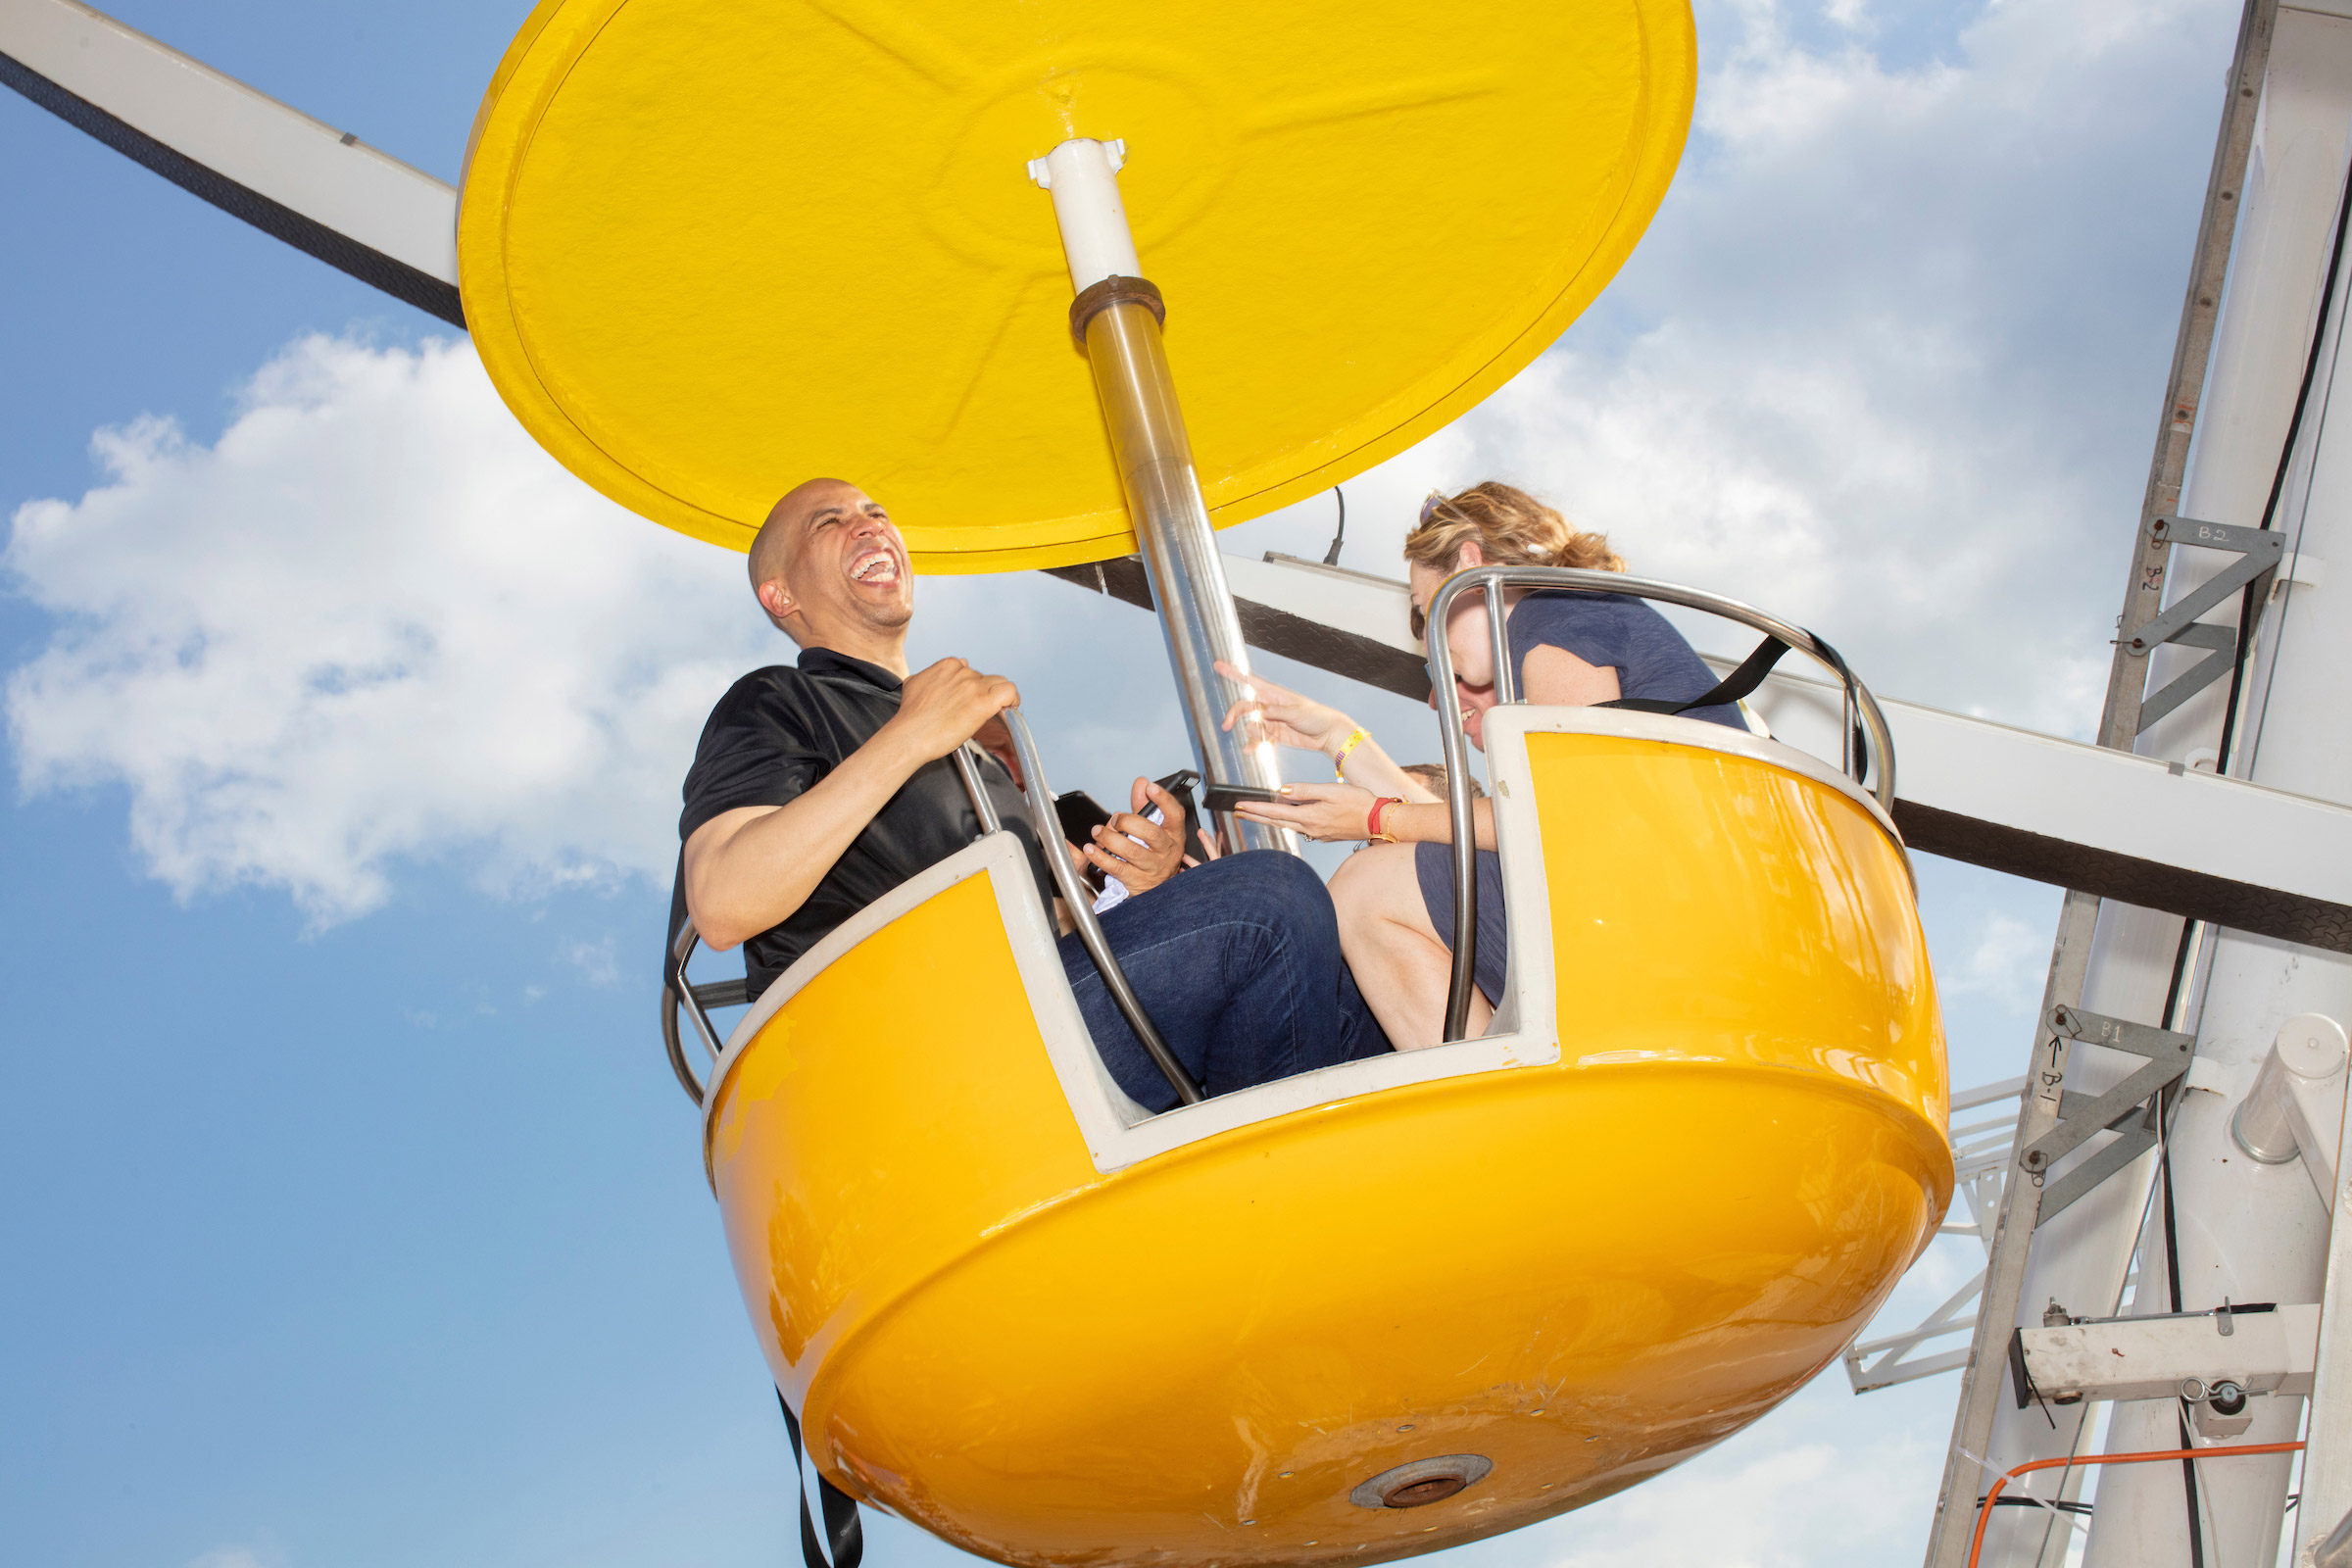 Democratic presidential candidate Cory Booker rides the ferris wheel on Aug. 10. (M. Scott Brauer for TIME)